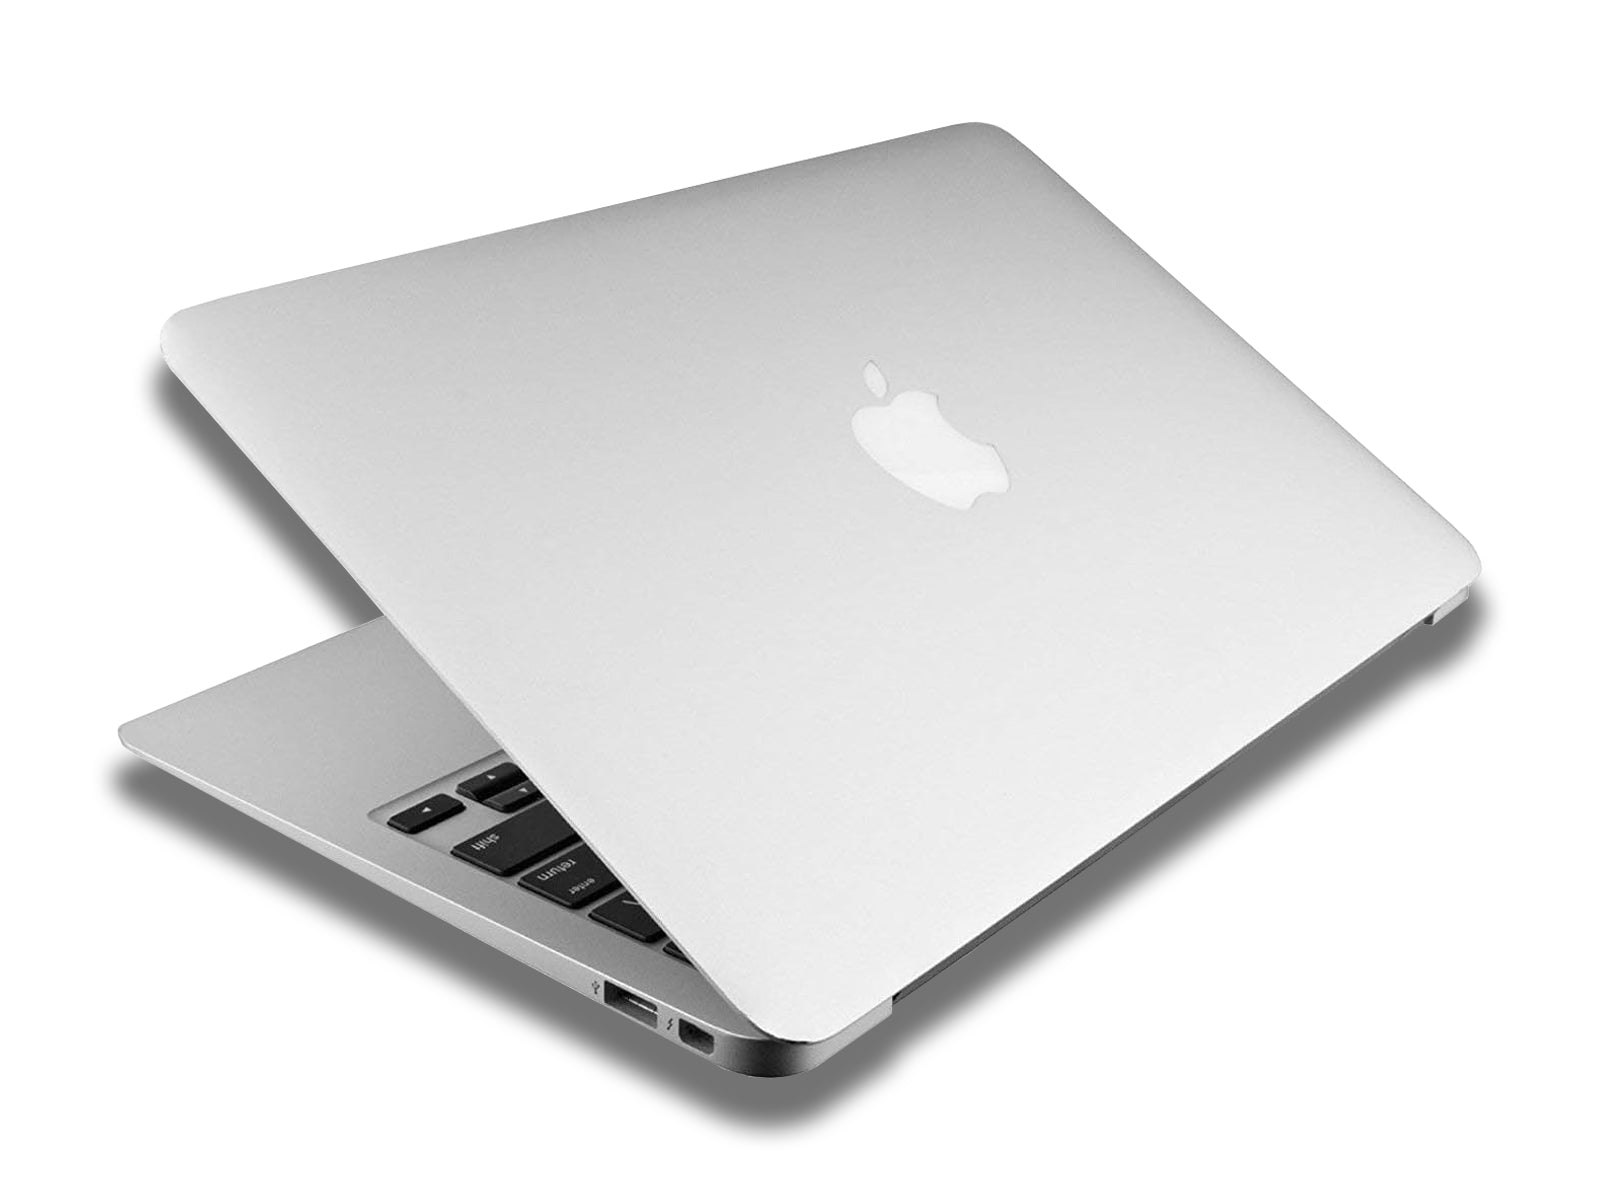 Image shows an angled overhead view of the Apple MacBook Air